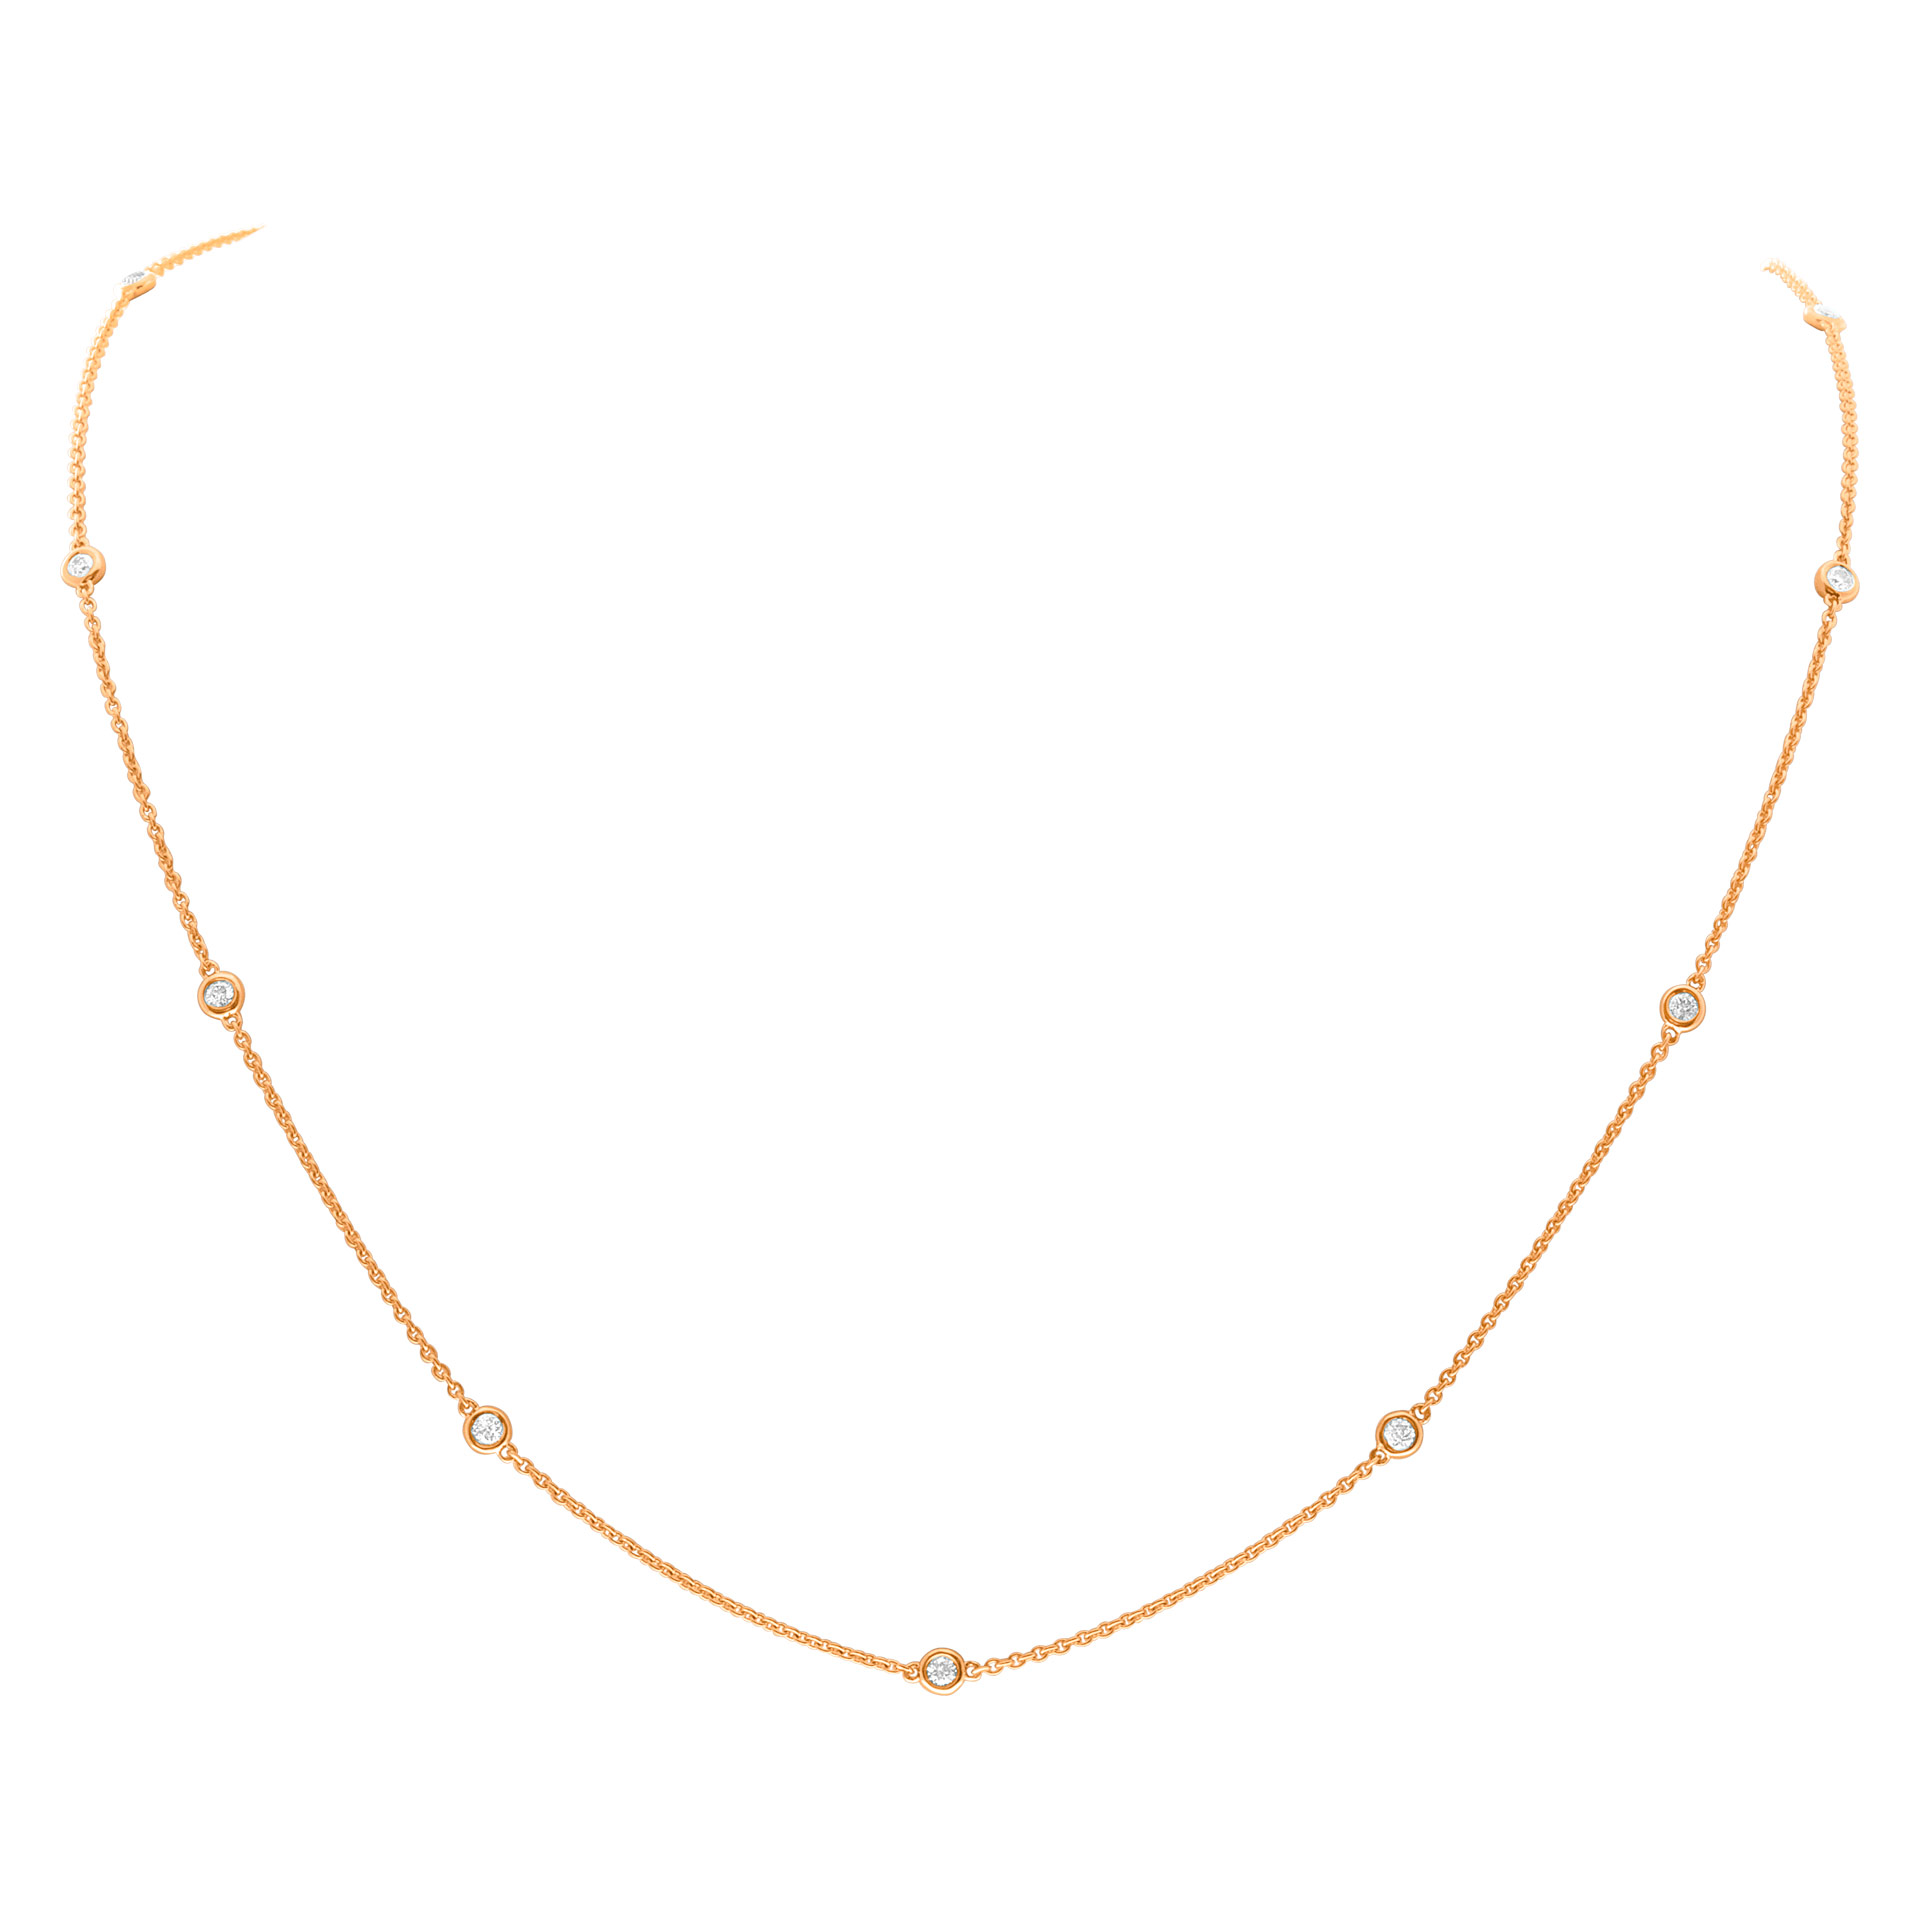 Diamonds by the yard 14k rose gold 1.05 carats in diamonds image 2